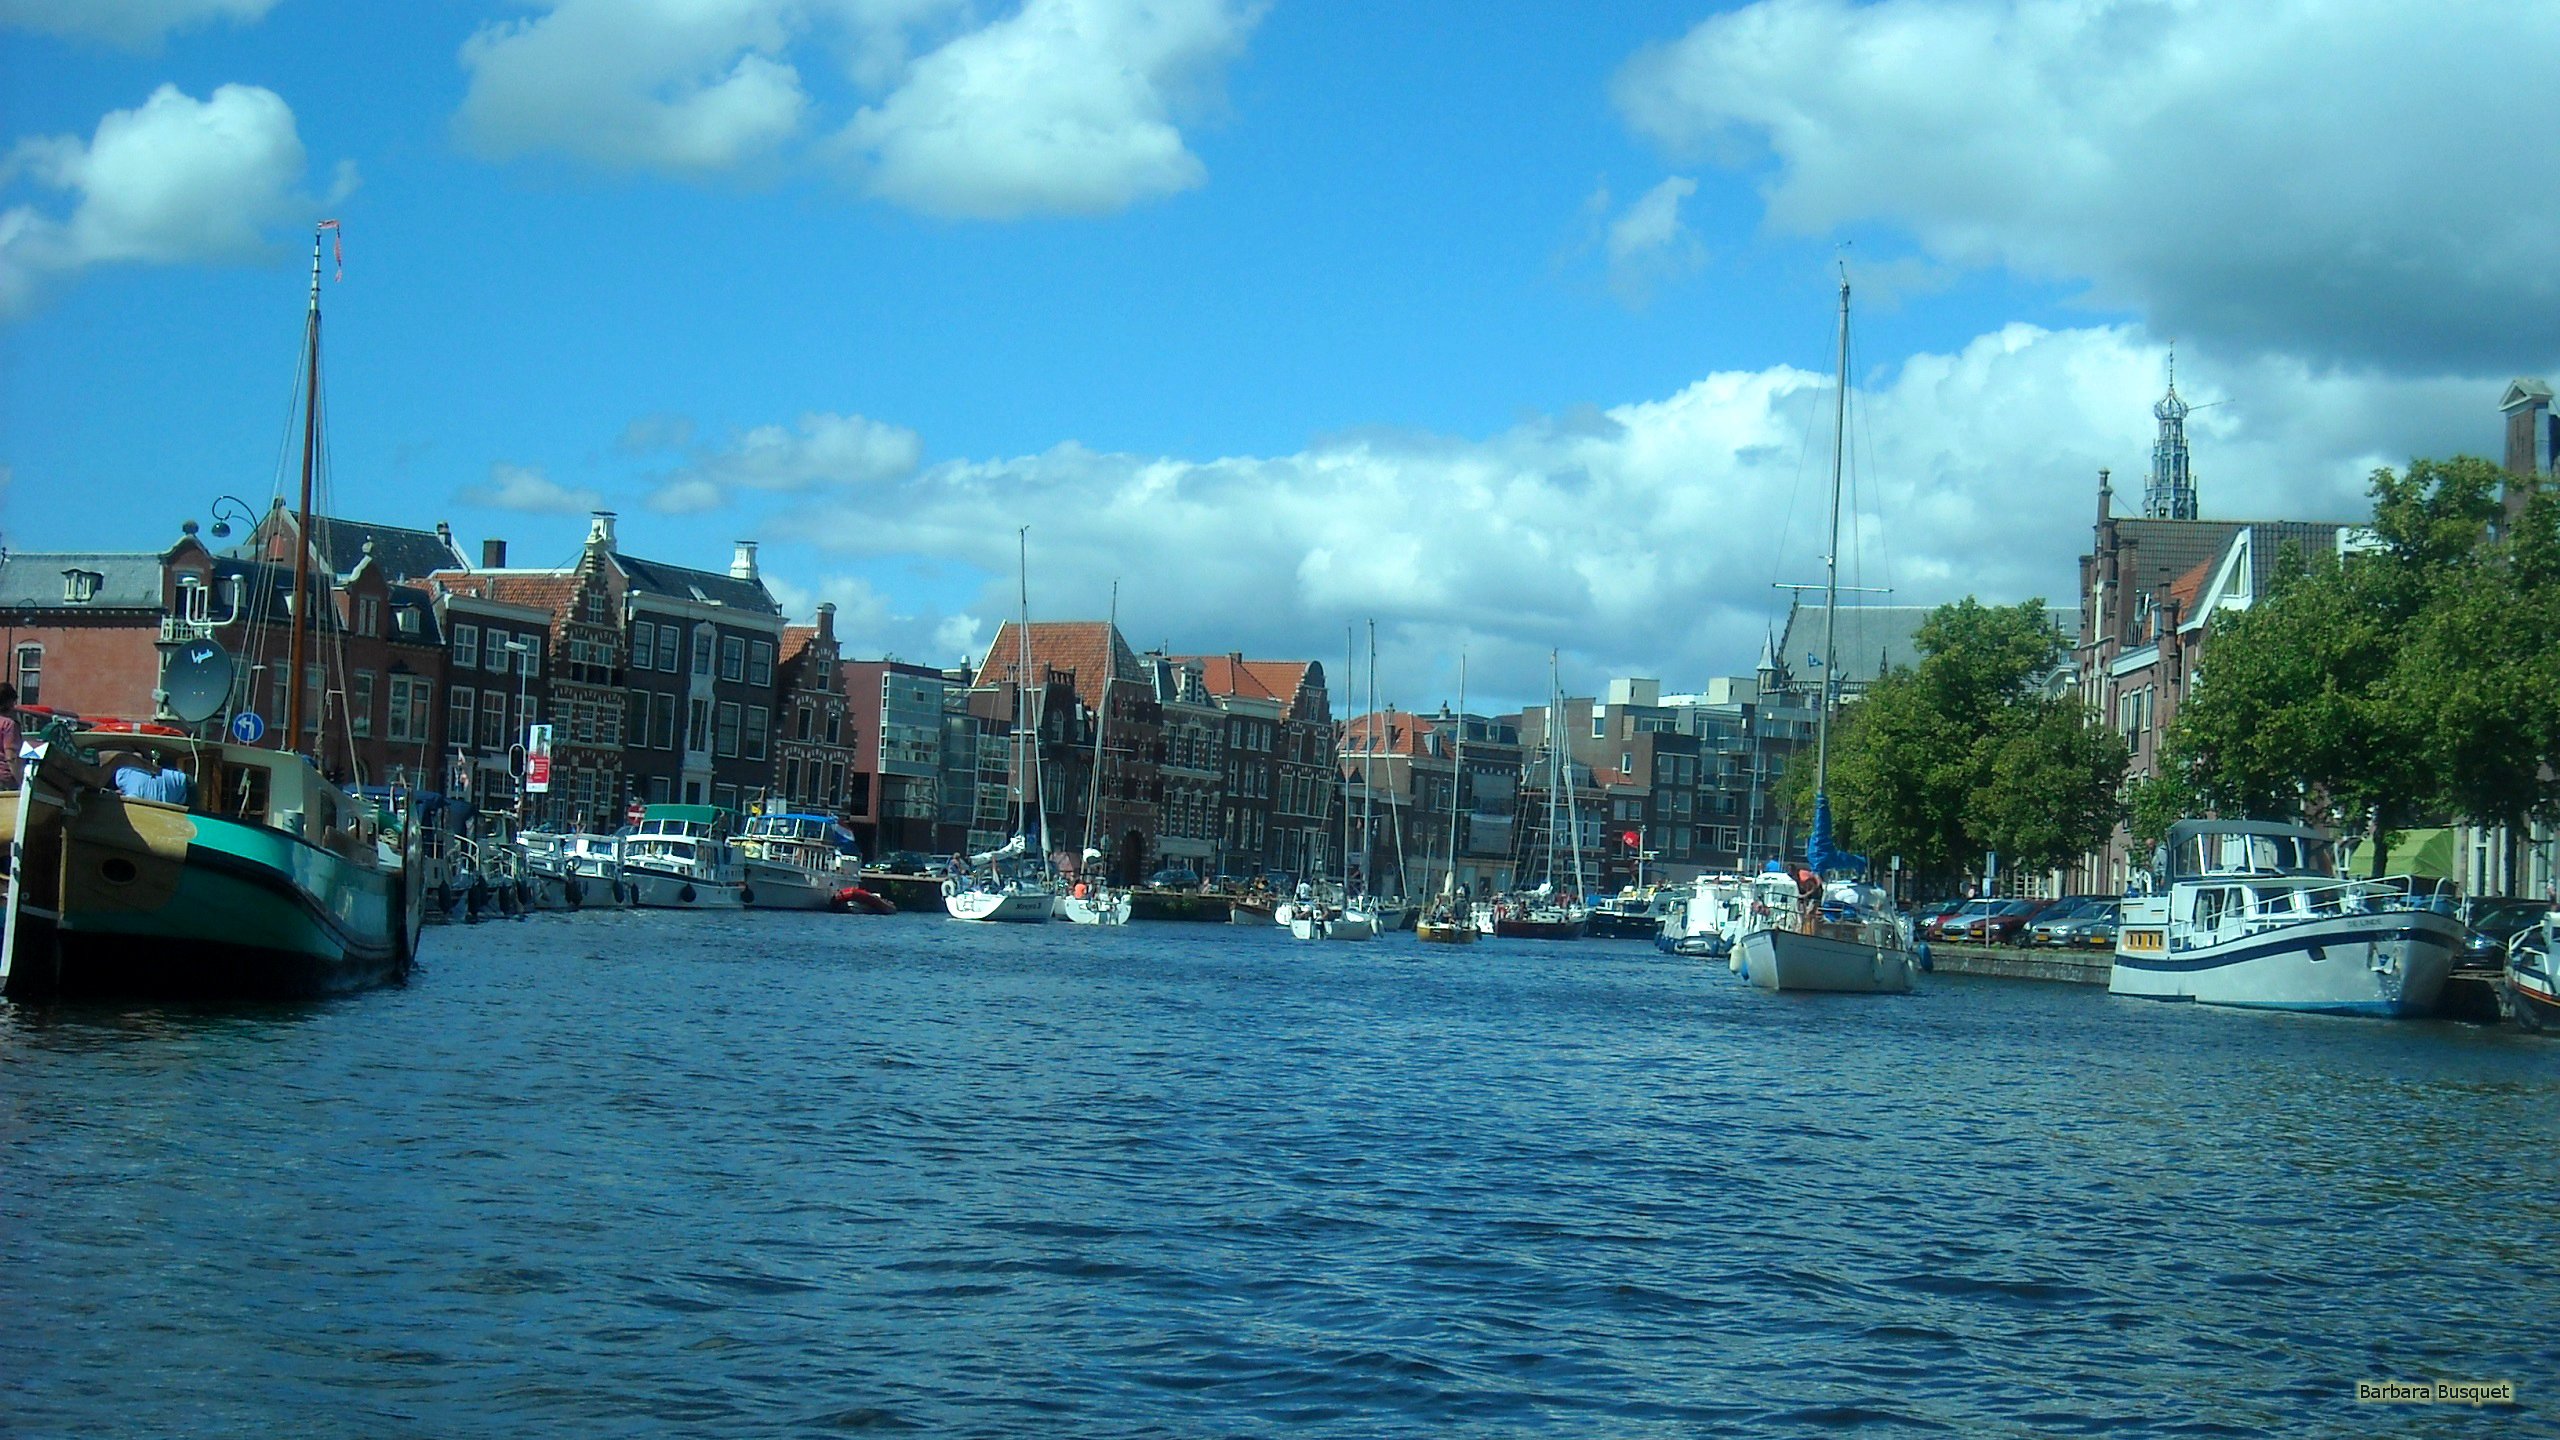 Wallpaper with boats in the Canals of Haarlem on an average day in